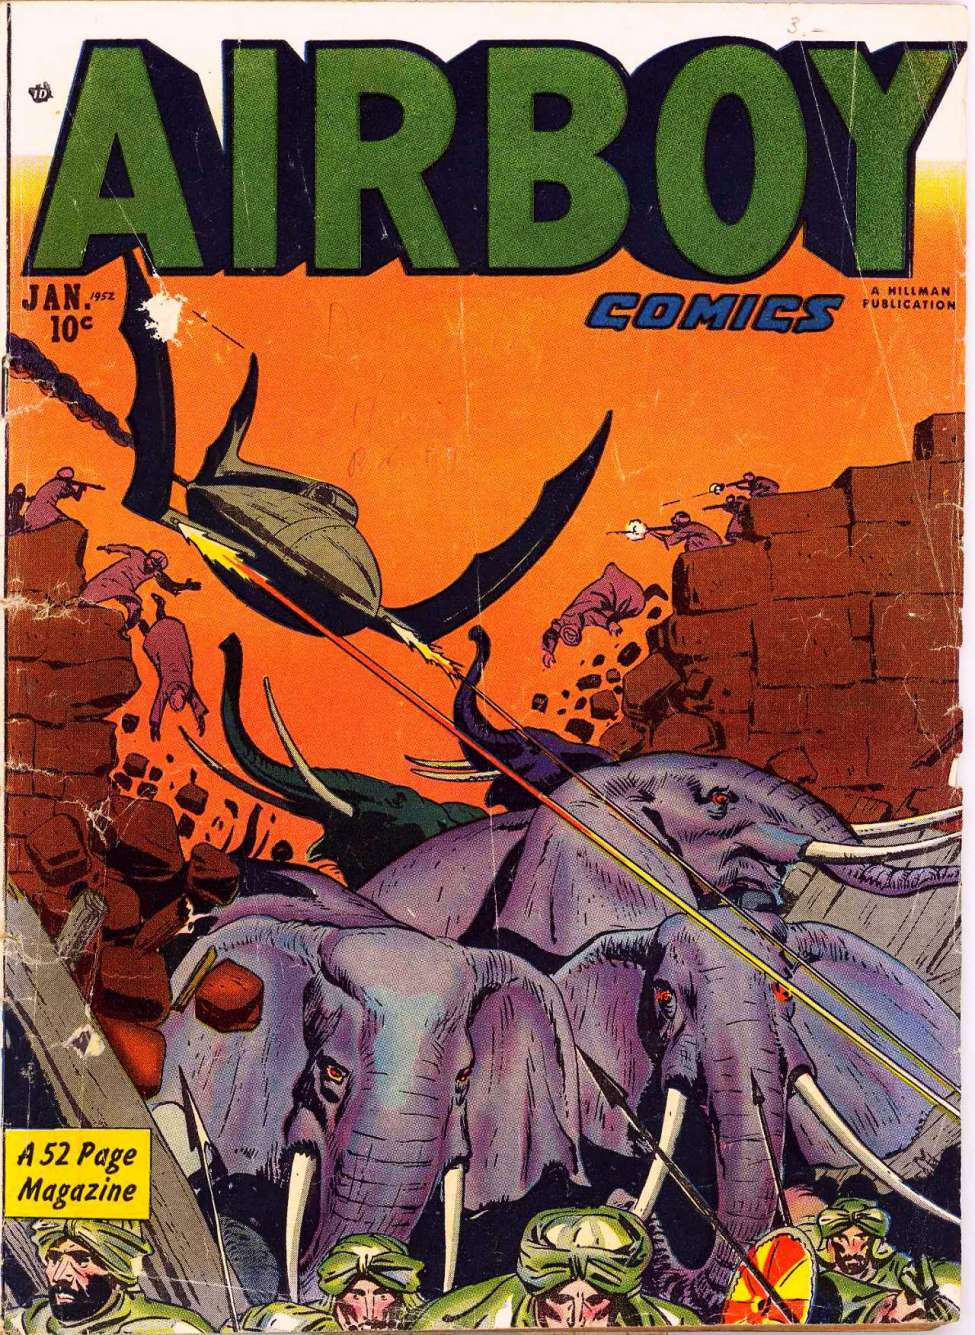 Book Cover For Airboy Comics v8 12